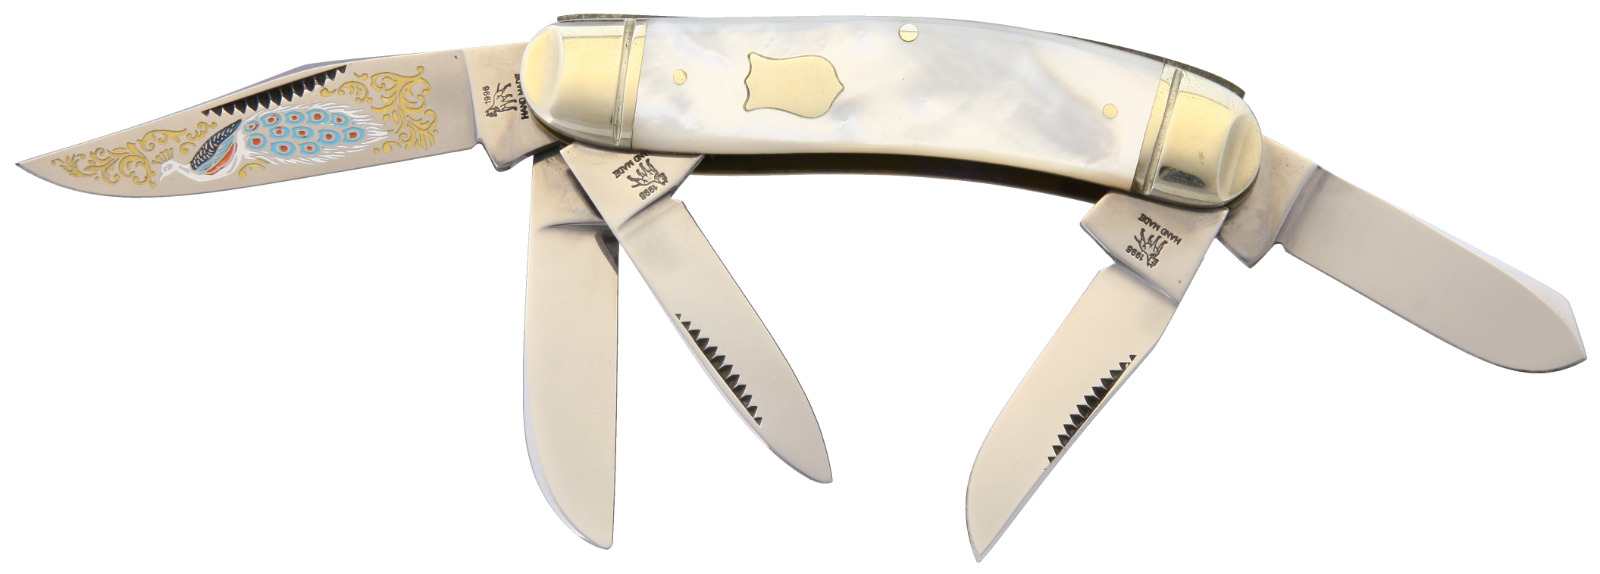 BULLDOG BRAND 5 BLADE SOWBELLY - MOTHER of PEARL HANDLES - PRODUCED IN 1998